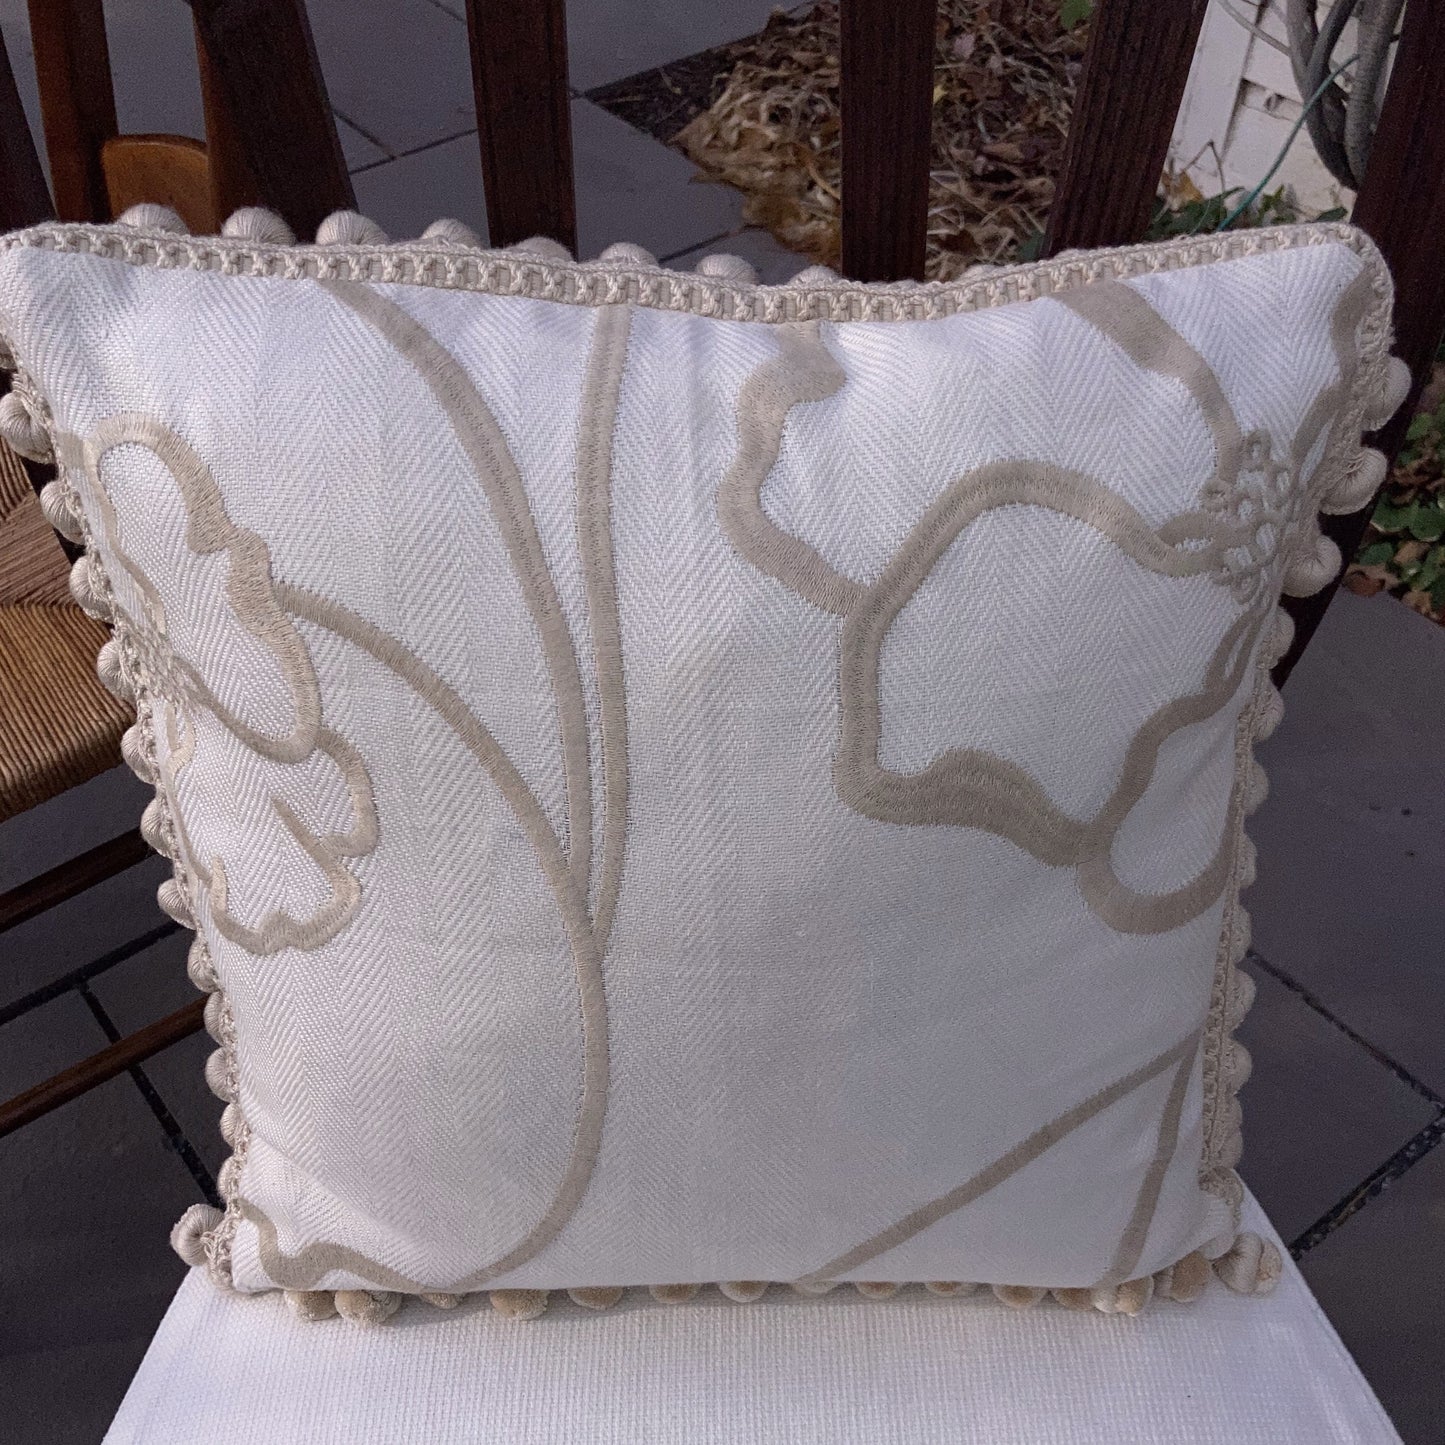 Flore Embroidered Contemporary Neutral 16 X 16 Square Designer Manuel Canovas Pillow with Down Feather Insert